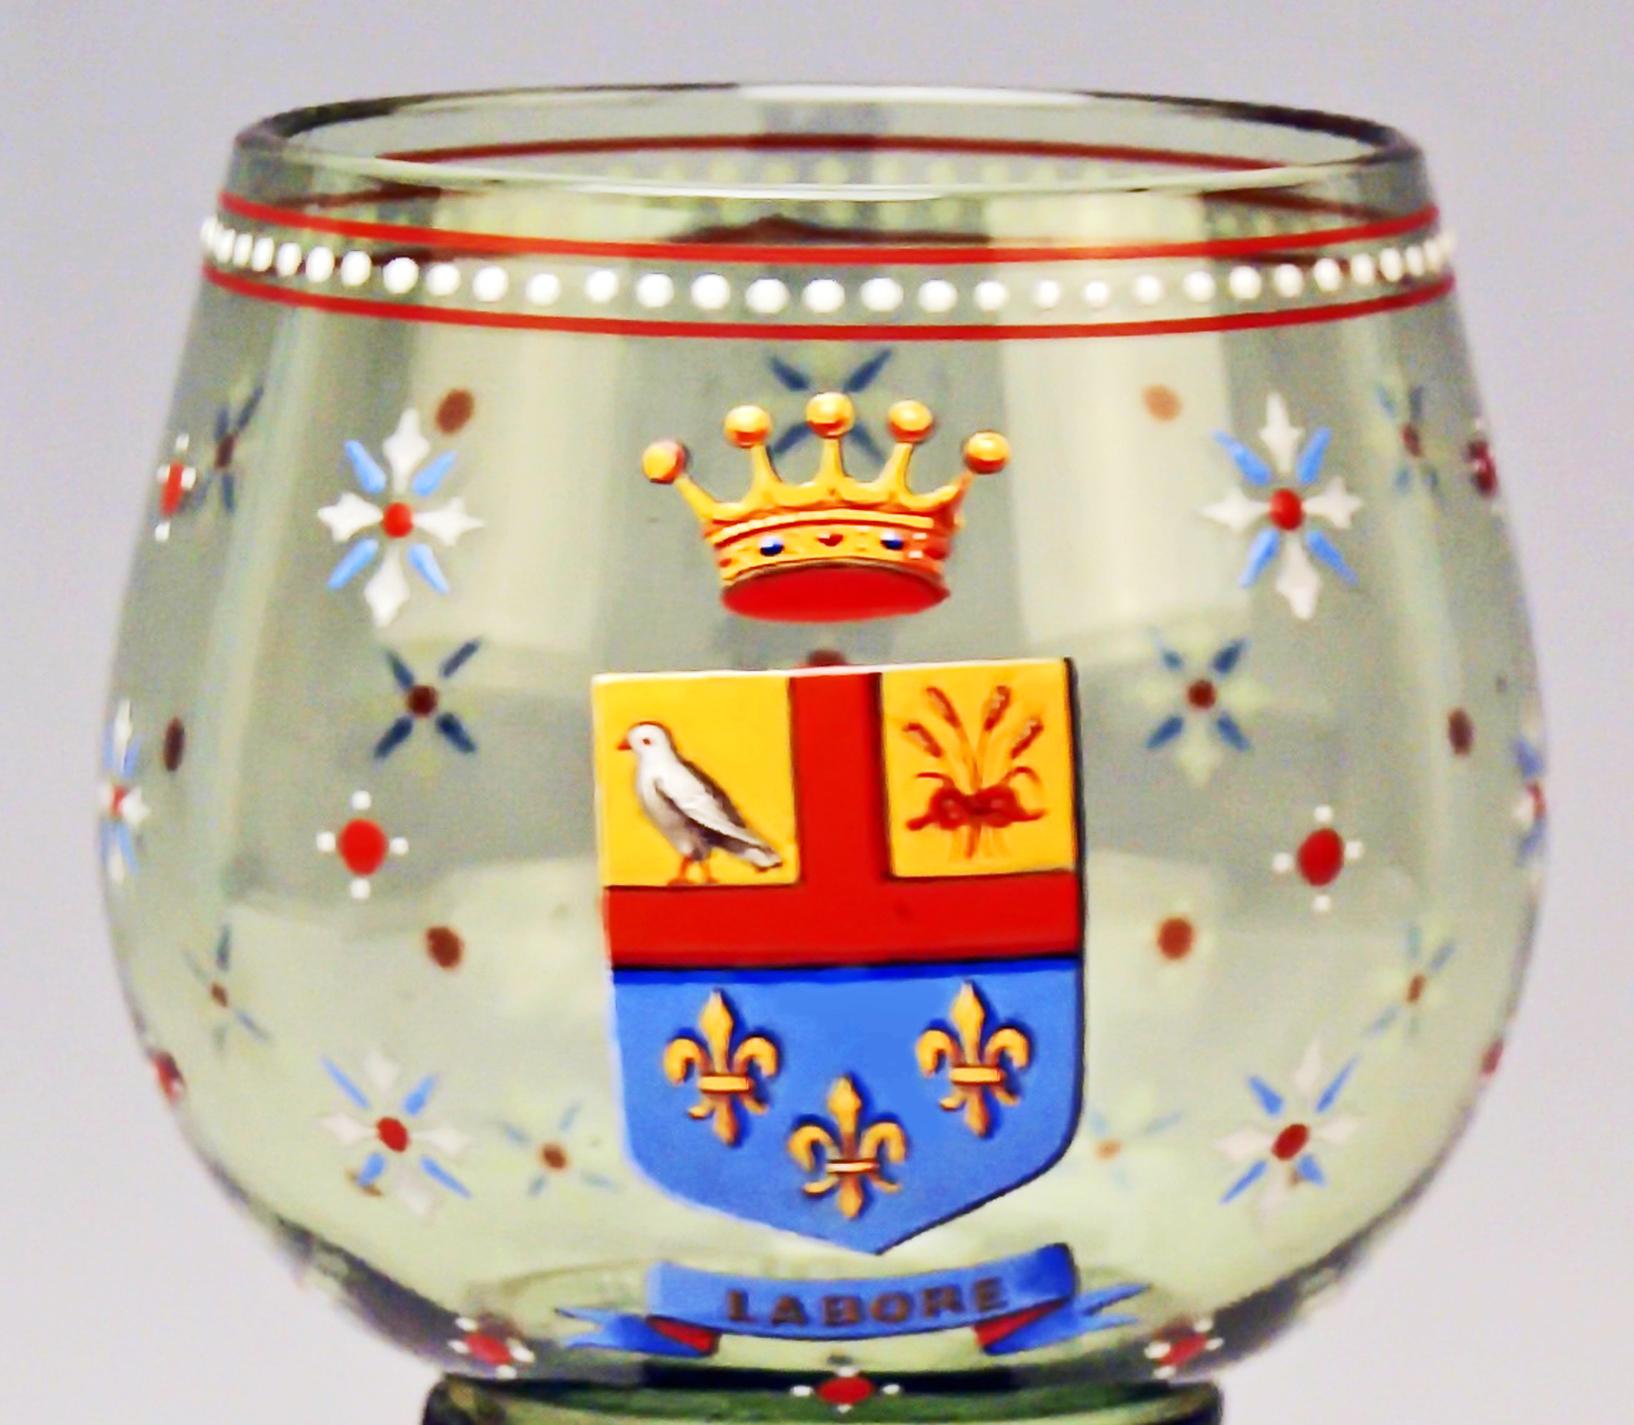 Lobmeyr wine glass (of stunning manufacturing quality!), based on round tiered foot: Green glass, handmade (blown and formed) with enamel paintings
Made circa 1910-1915
Painted by multicolored opaque enamel:
White borders looking like pearls